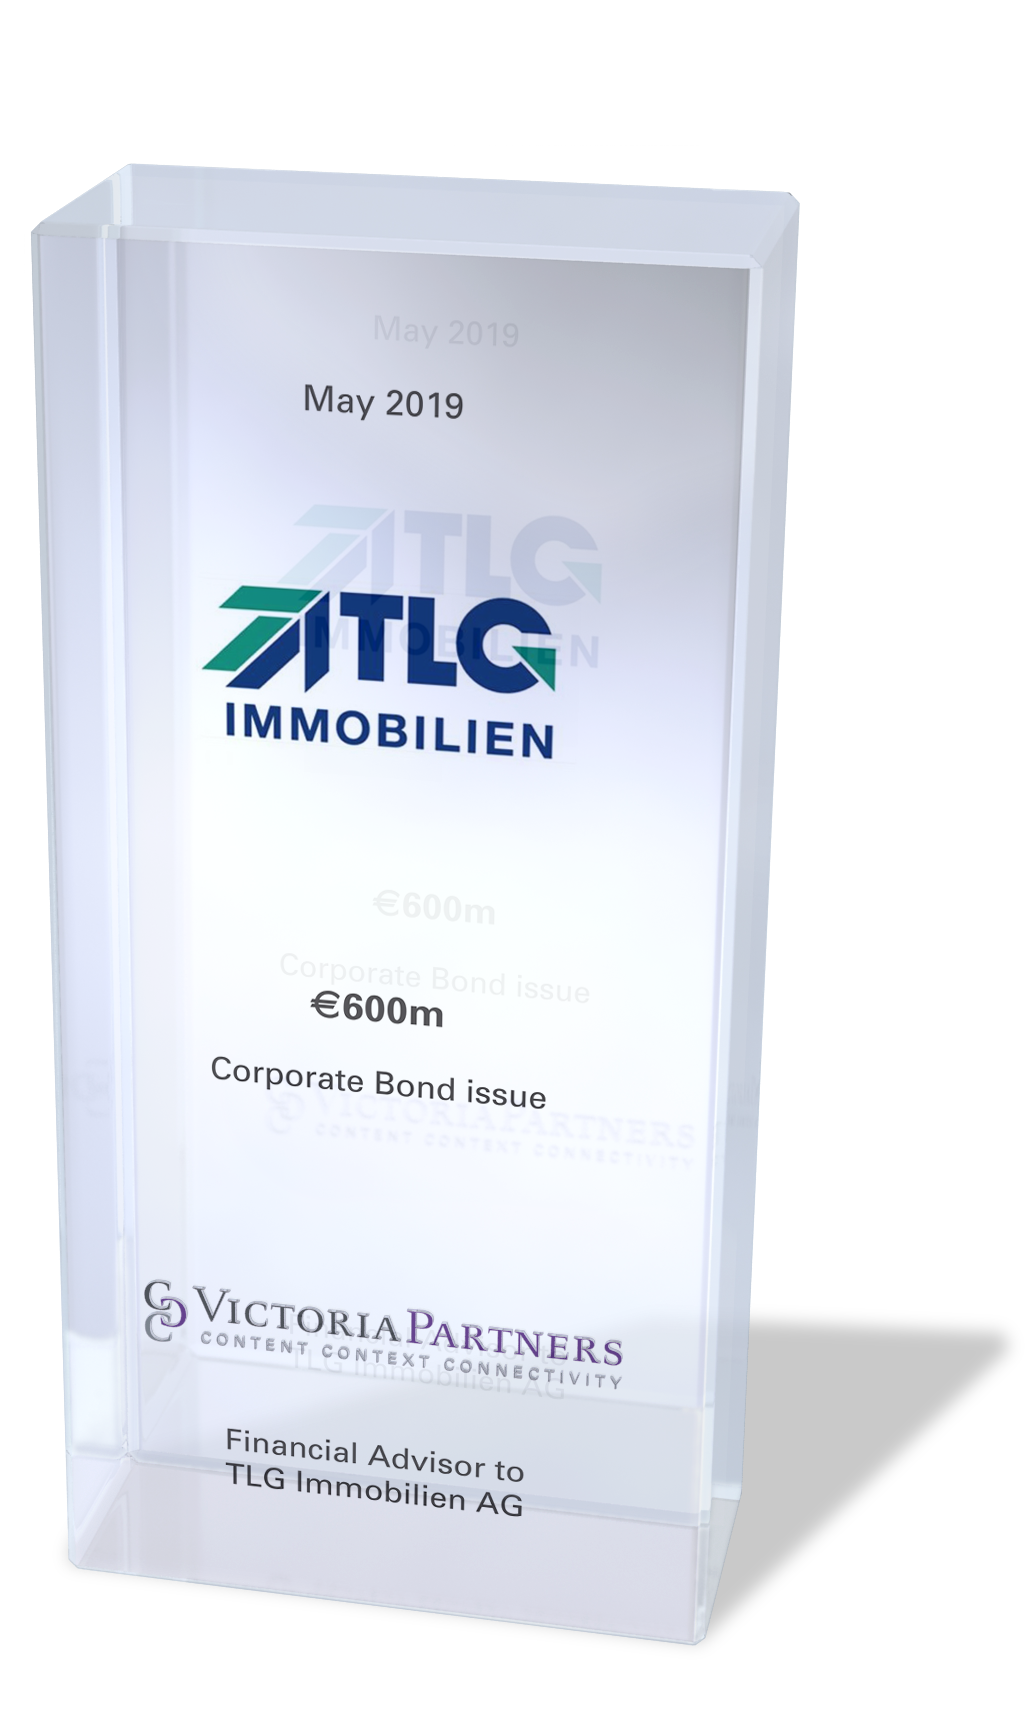 VICTORIAPARTNERS - Financial Advisor to TLG Immobilien AG - May 2019